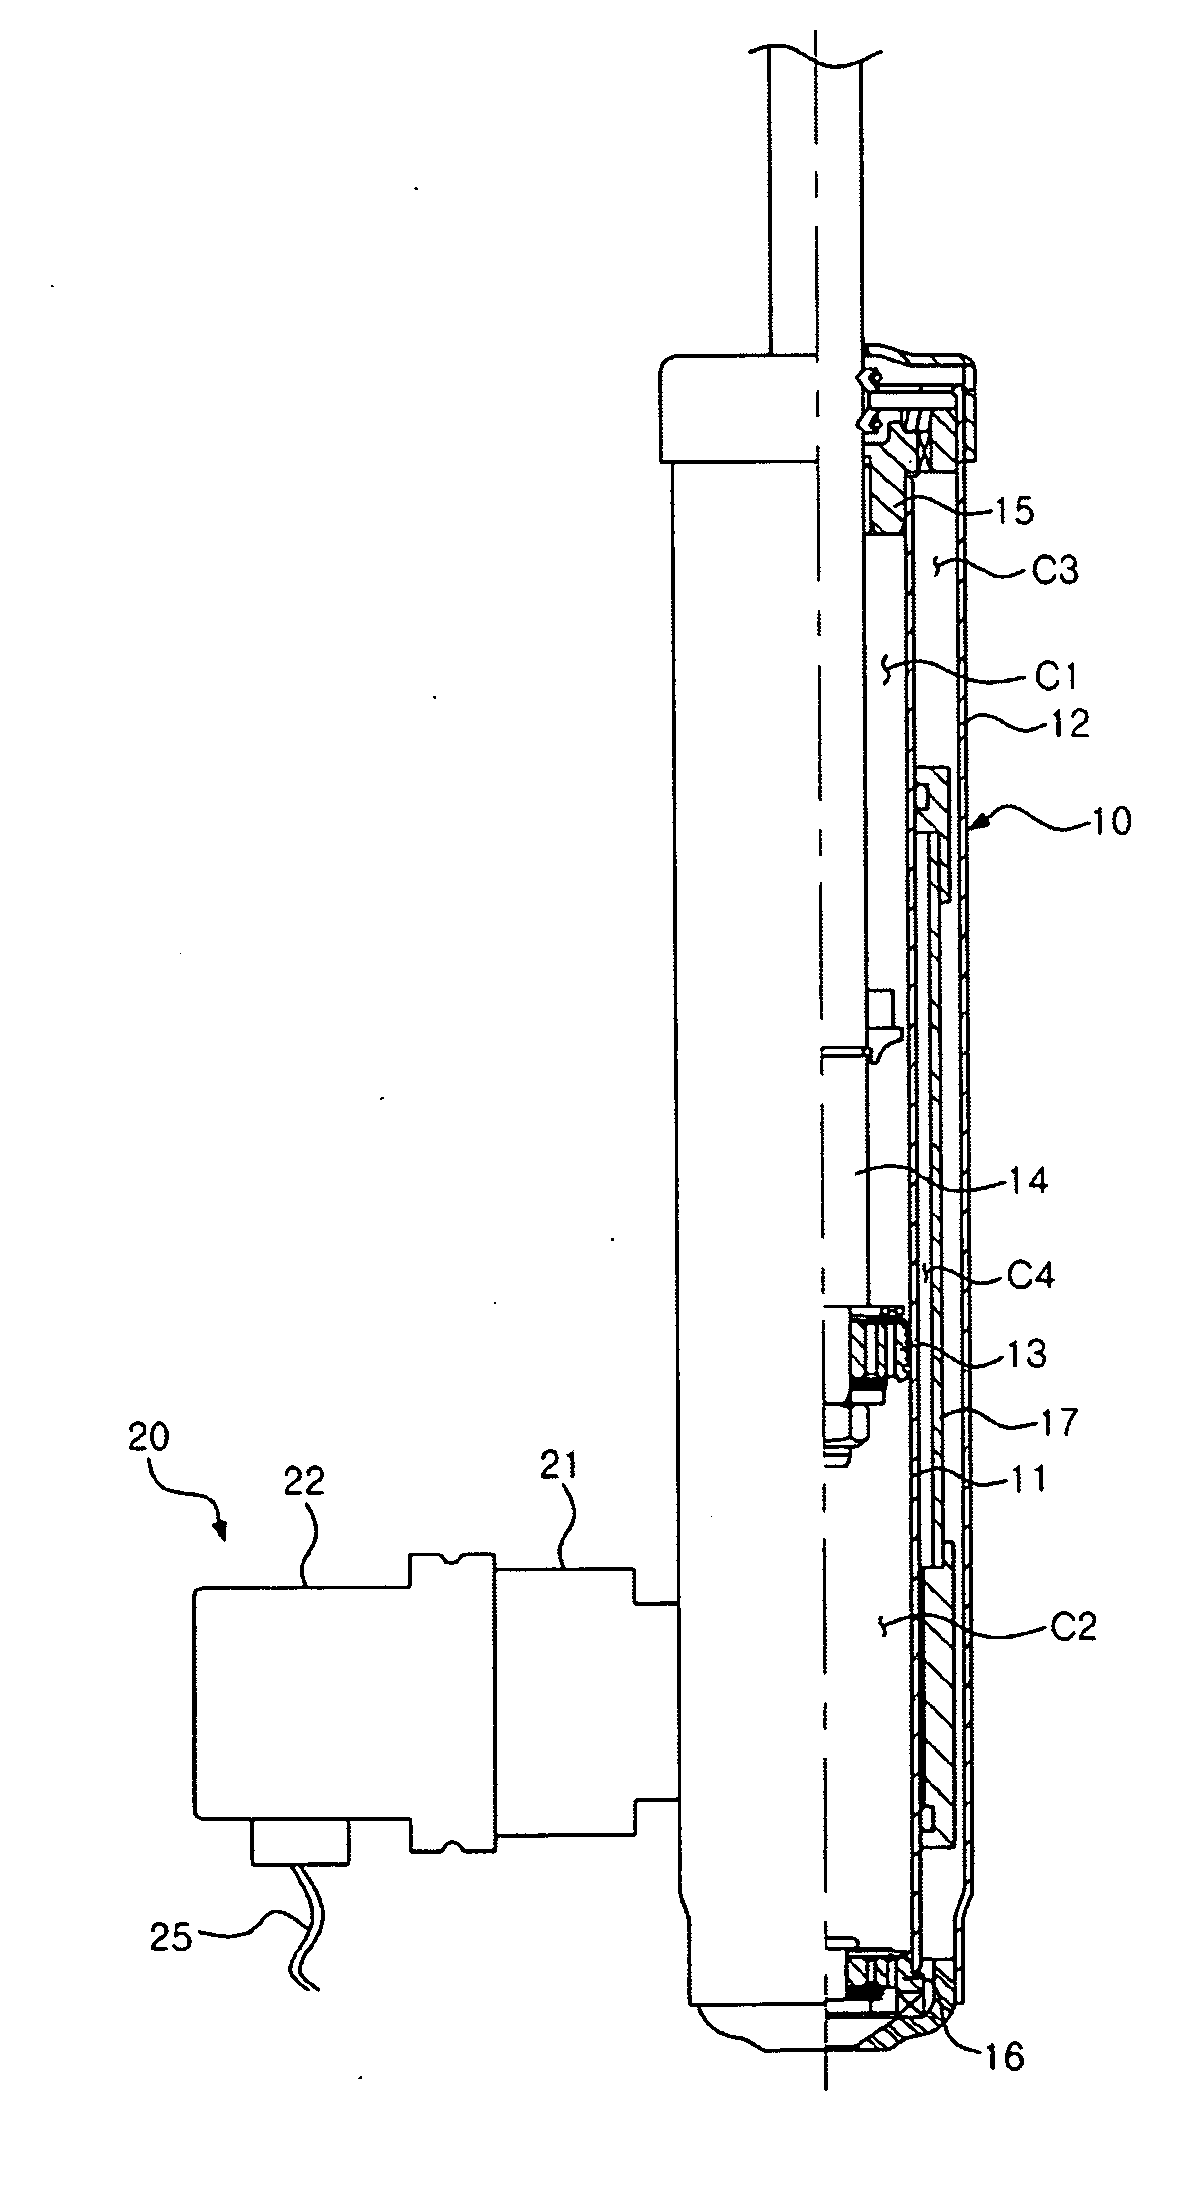 Solenoid valve assembly of variable damping force damper and method of assembling the same